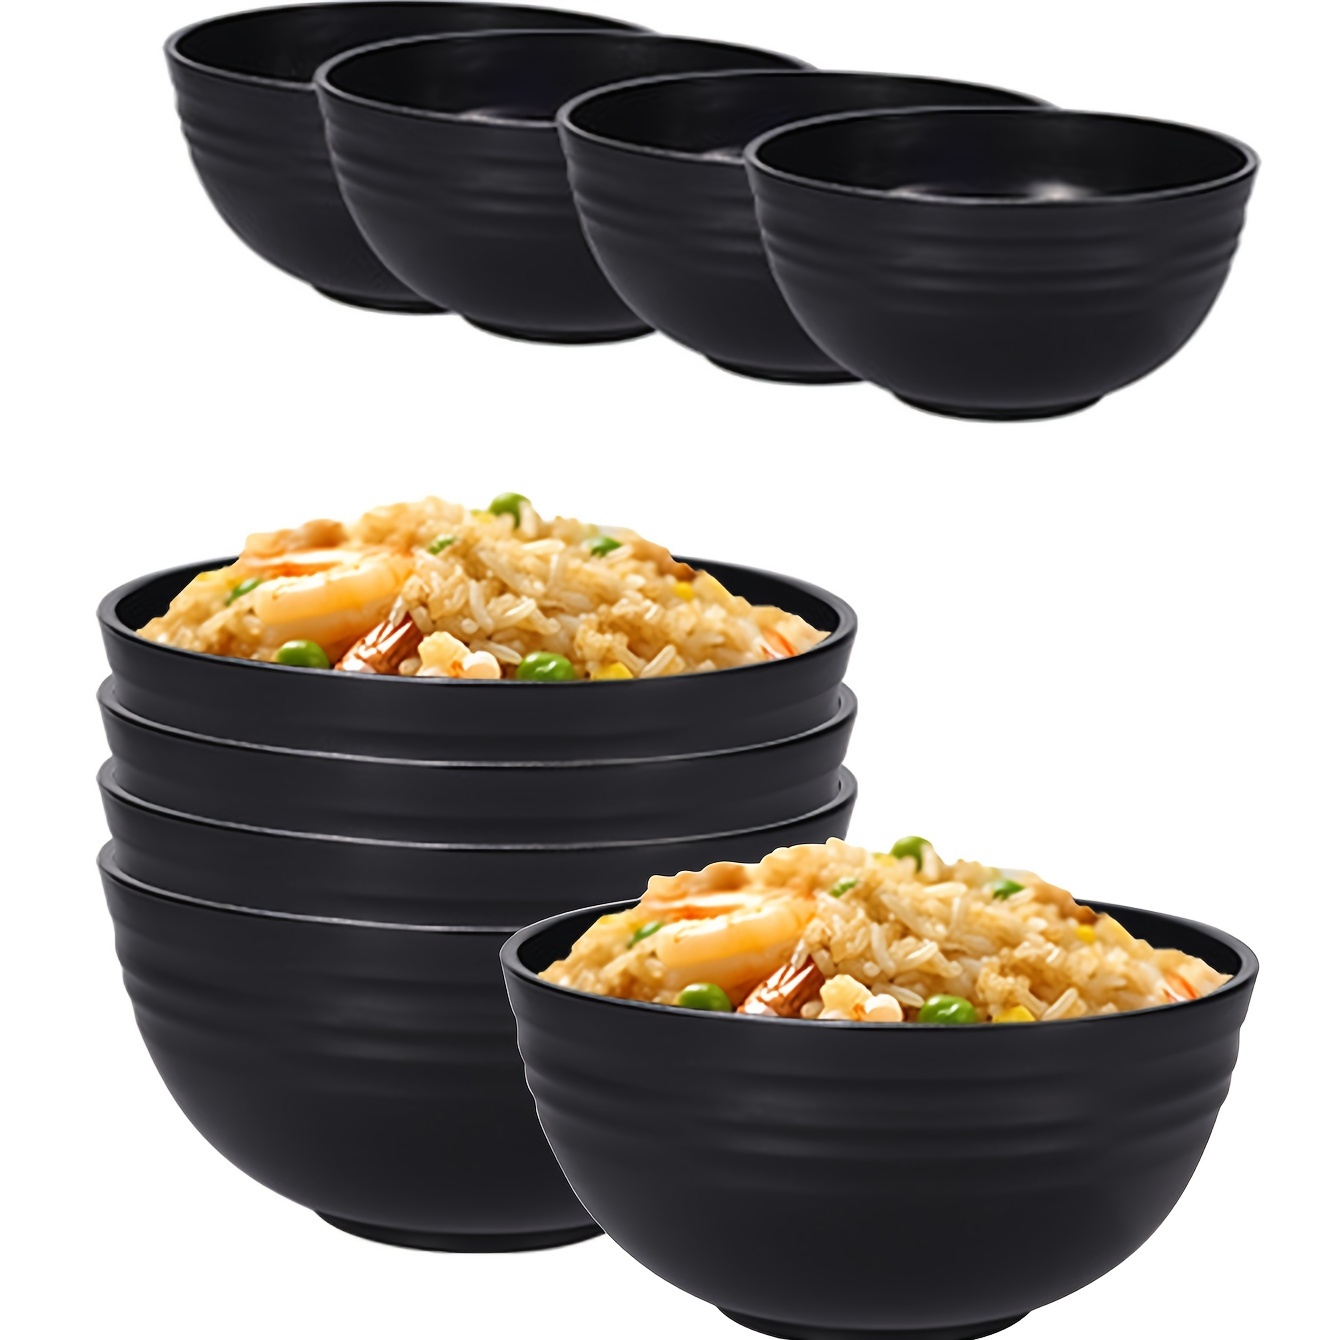 

6-piece Black Pp Plastic Bowls, 5.8" X 2.8" - Thick, Shatterproof & Heat-resistant For Outdoor Dining